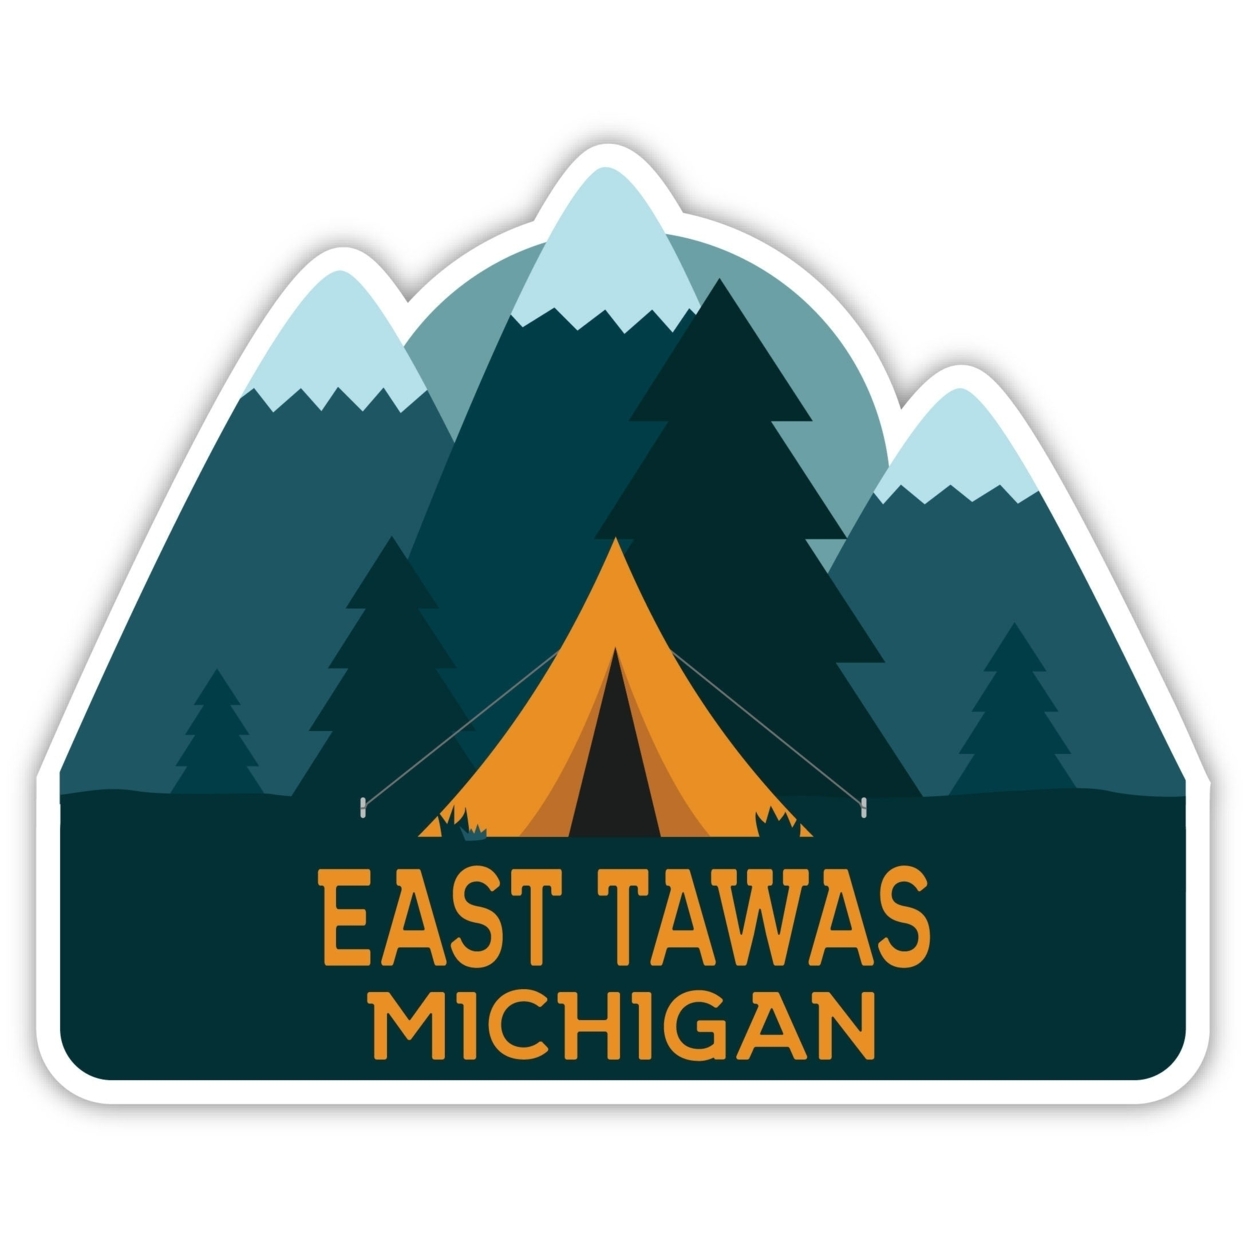 East Tawas Michigan Souvenir Decorative Stickers (Choose Theme And Size) - 4-Pack, 4-Inch, Camp Life